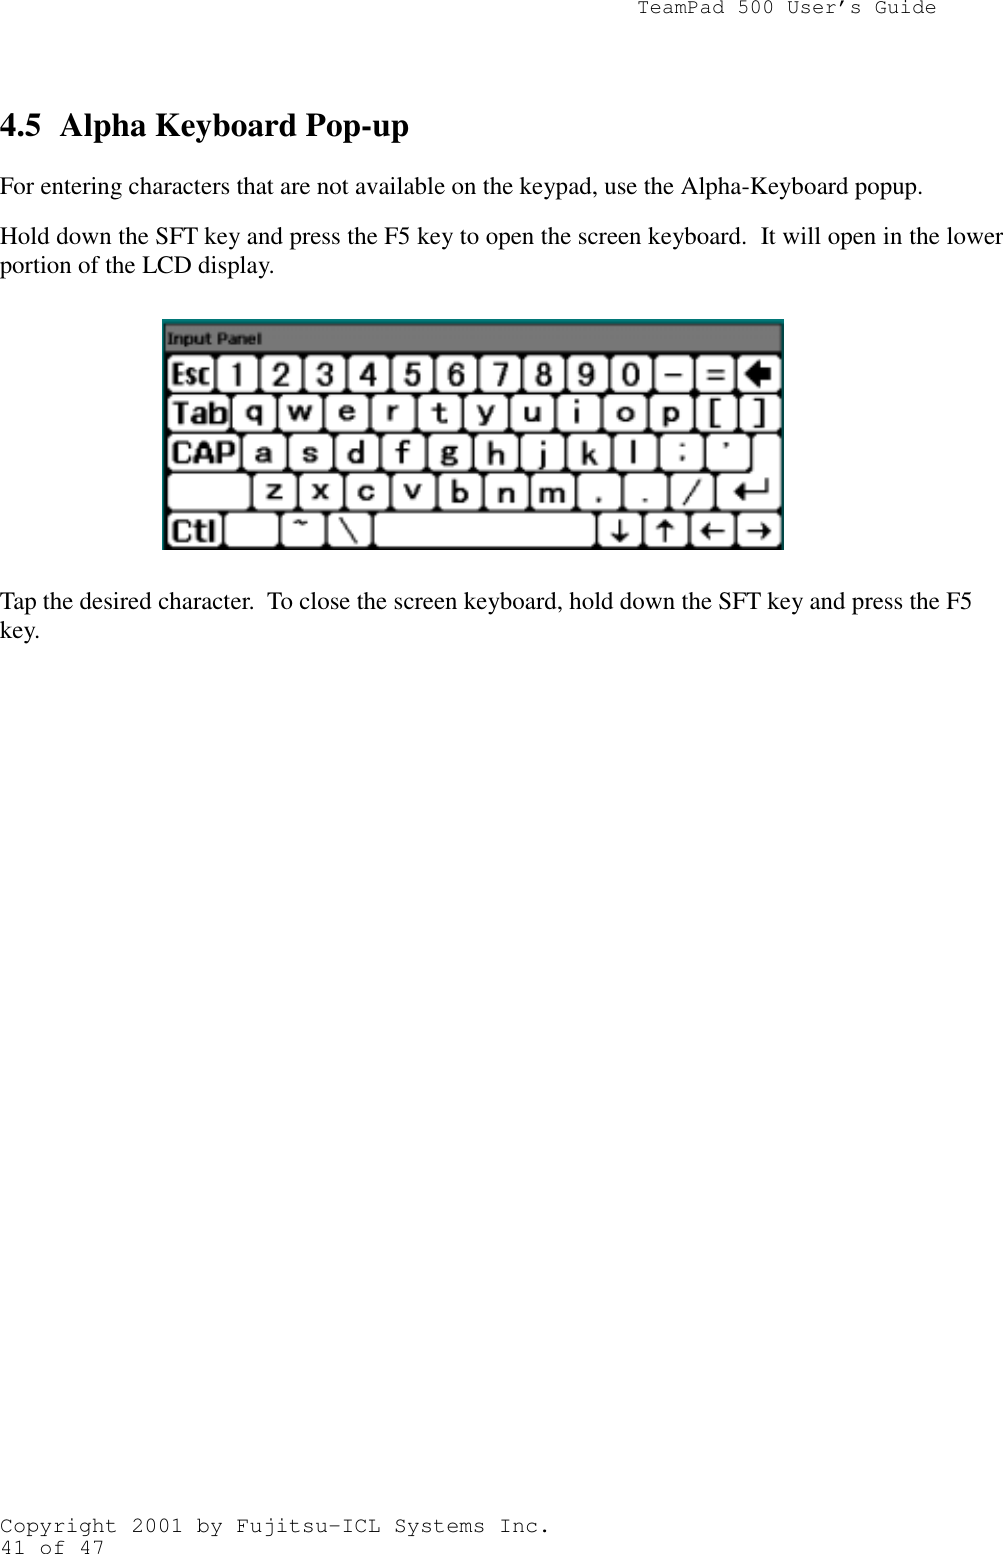                TeamPad 500 User’s GuideCopyright 2001 by Fujitsu-ICL Systems Inc.41 of 474.5 Alpha Keyboard Pop-upFor entering characters that are not available on the keypad, use the Alpha-Keyboard popup.Hold down the SFT key and press the F5 key to open the screen keyboard.  It will open in the lowerportion of the LCD display.Tap the desired character.  To close the screen keyboard, hold down the SFT key and press the F5key.